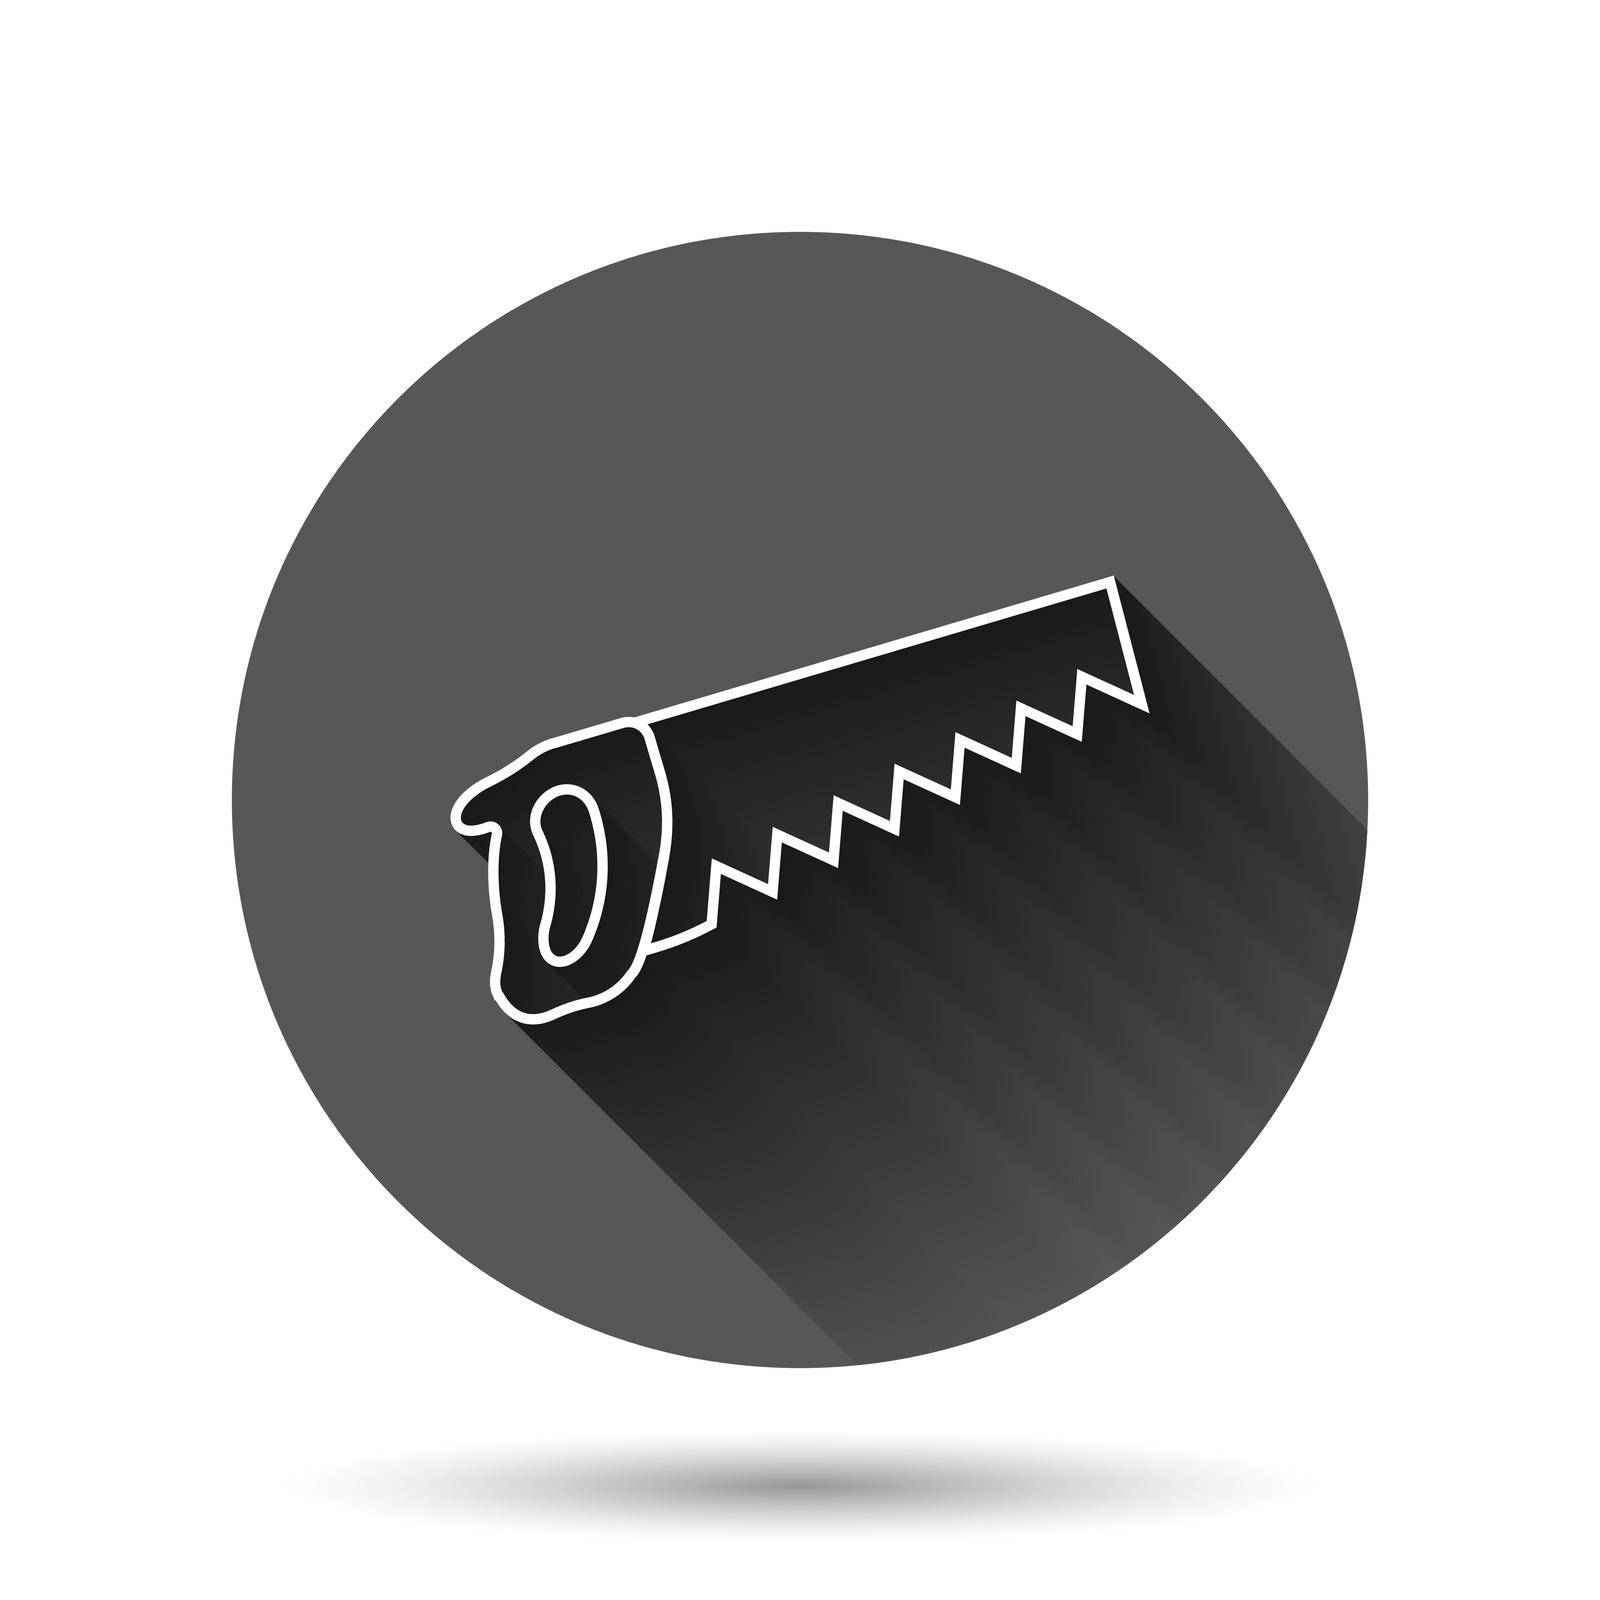 Saw blade icon in flat style. Working tools vector illustration on black round background with long shadow effect. Hammer circle button business concept.